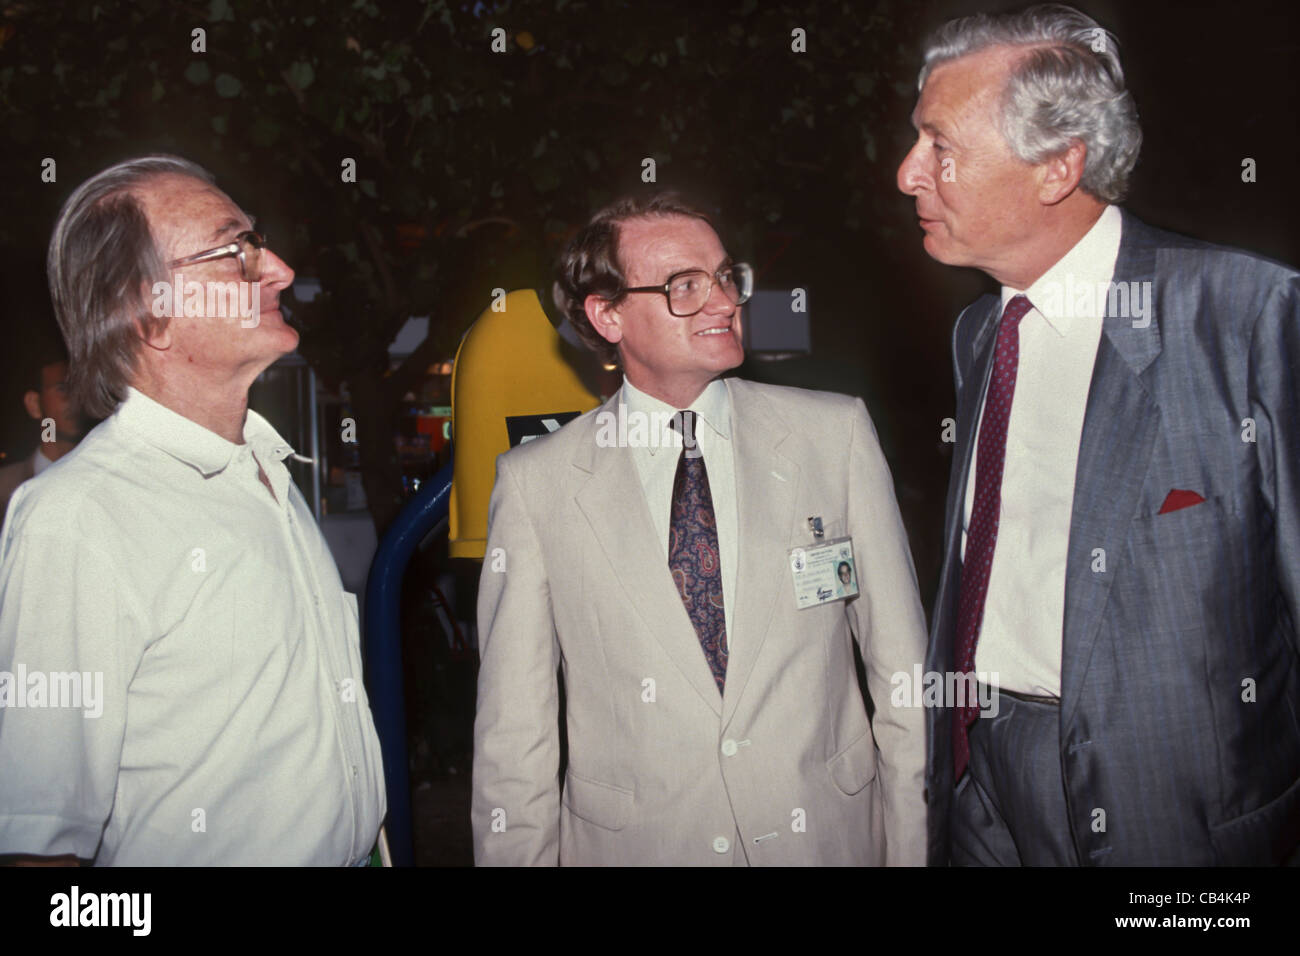 United Nations Conference on Environment and Development, Rio de Janeiro, Brazil, 3rd to 14th June 1992. Professor Jose Lutzenberger, British Environment Minister David Maclean and British Ambassador Michael Newington at the Global Forum Stock Photo